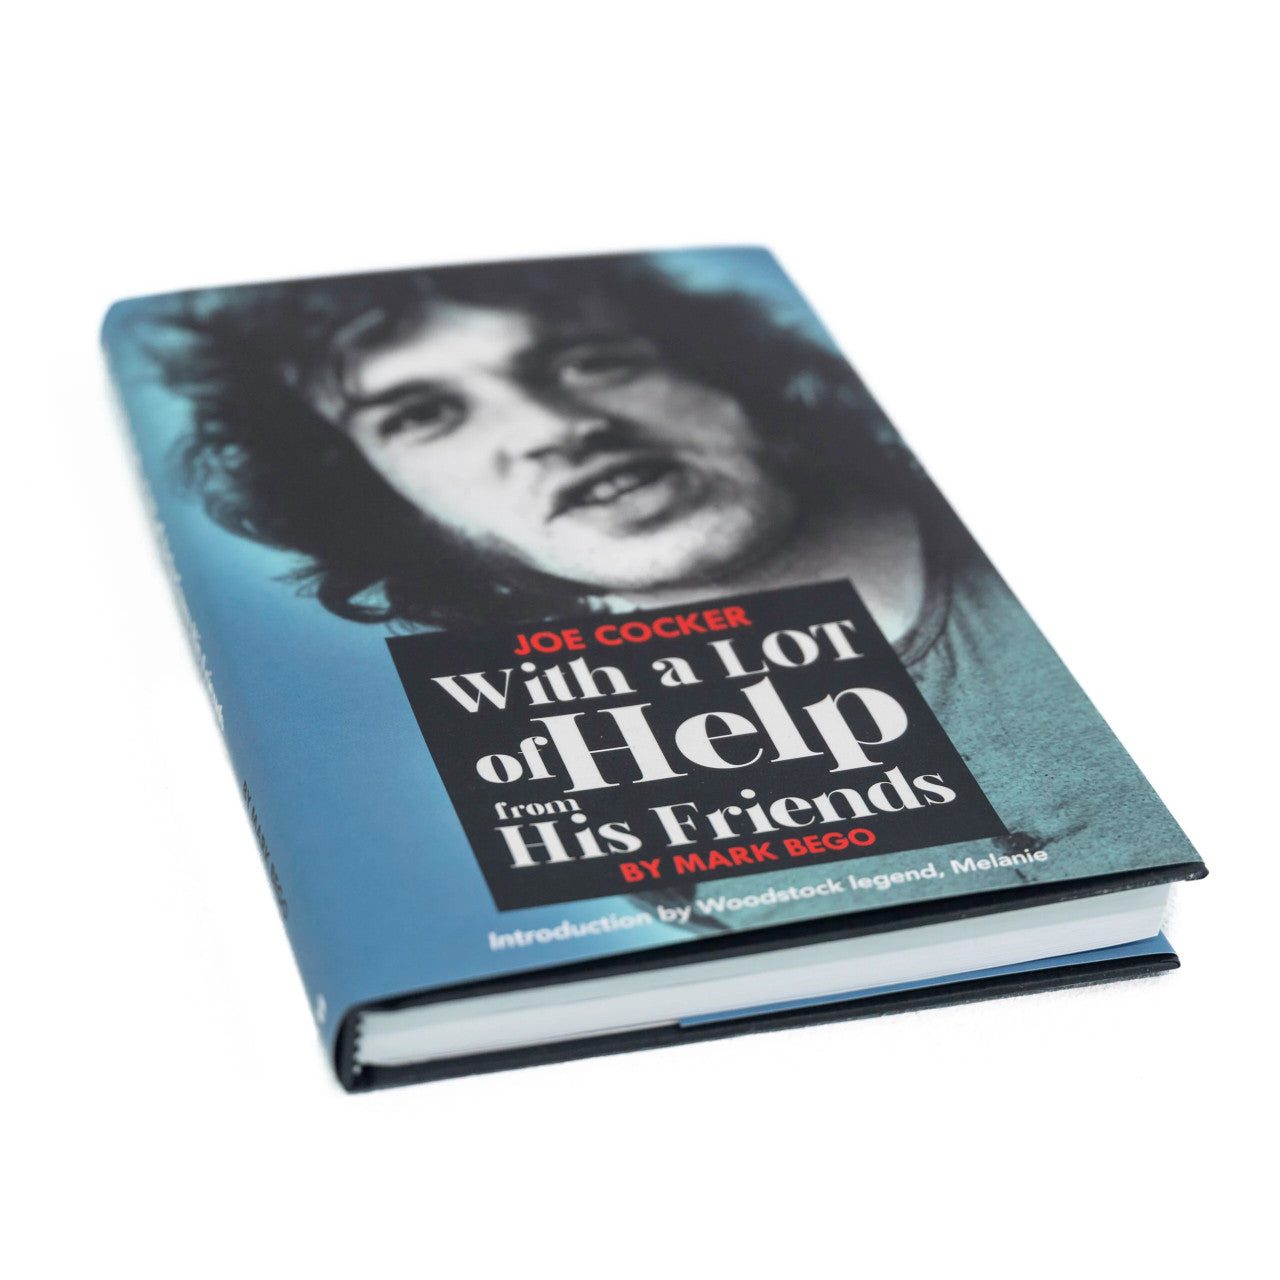 Joe Cocker Book "With a LOT of Help from His Friends" by Mark Bego